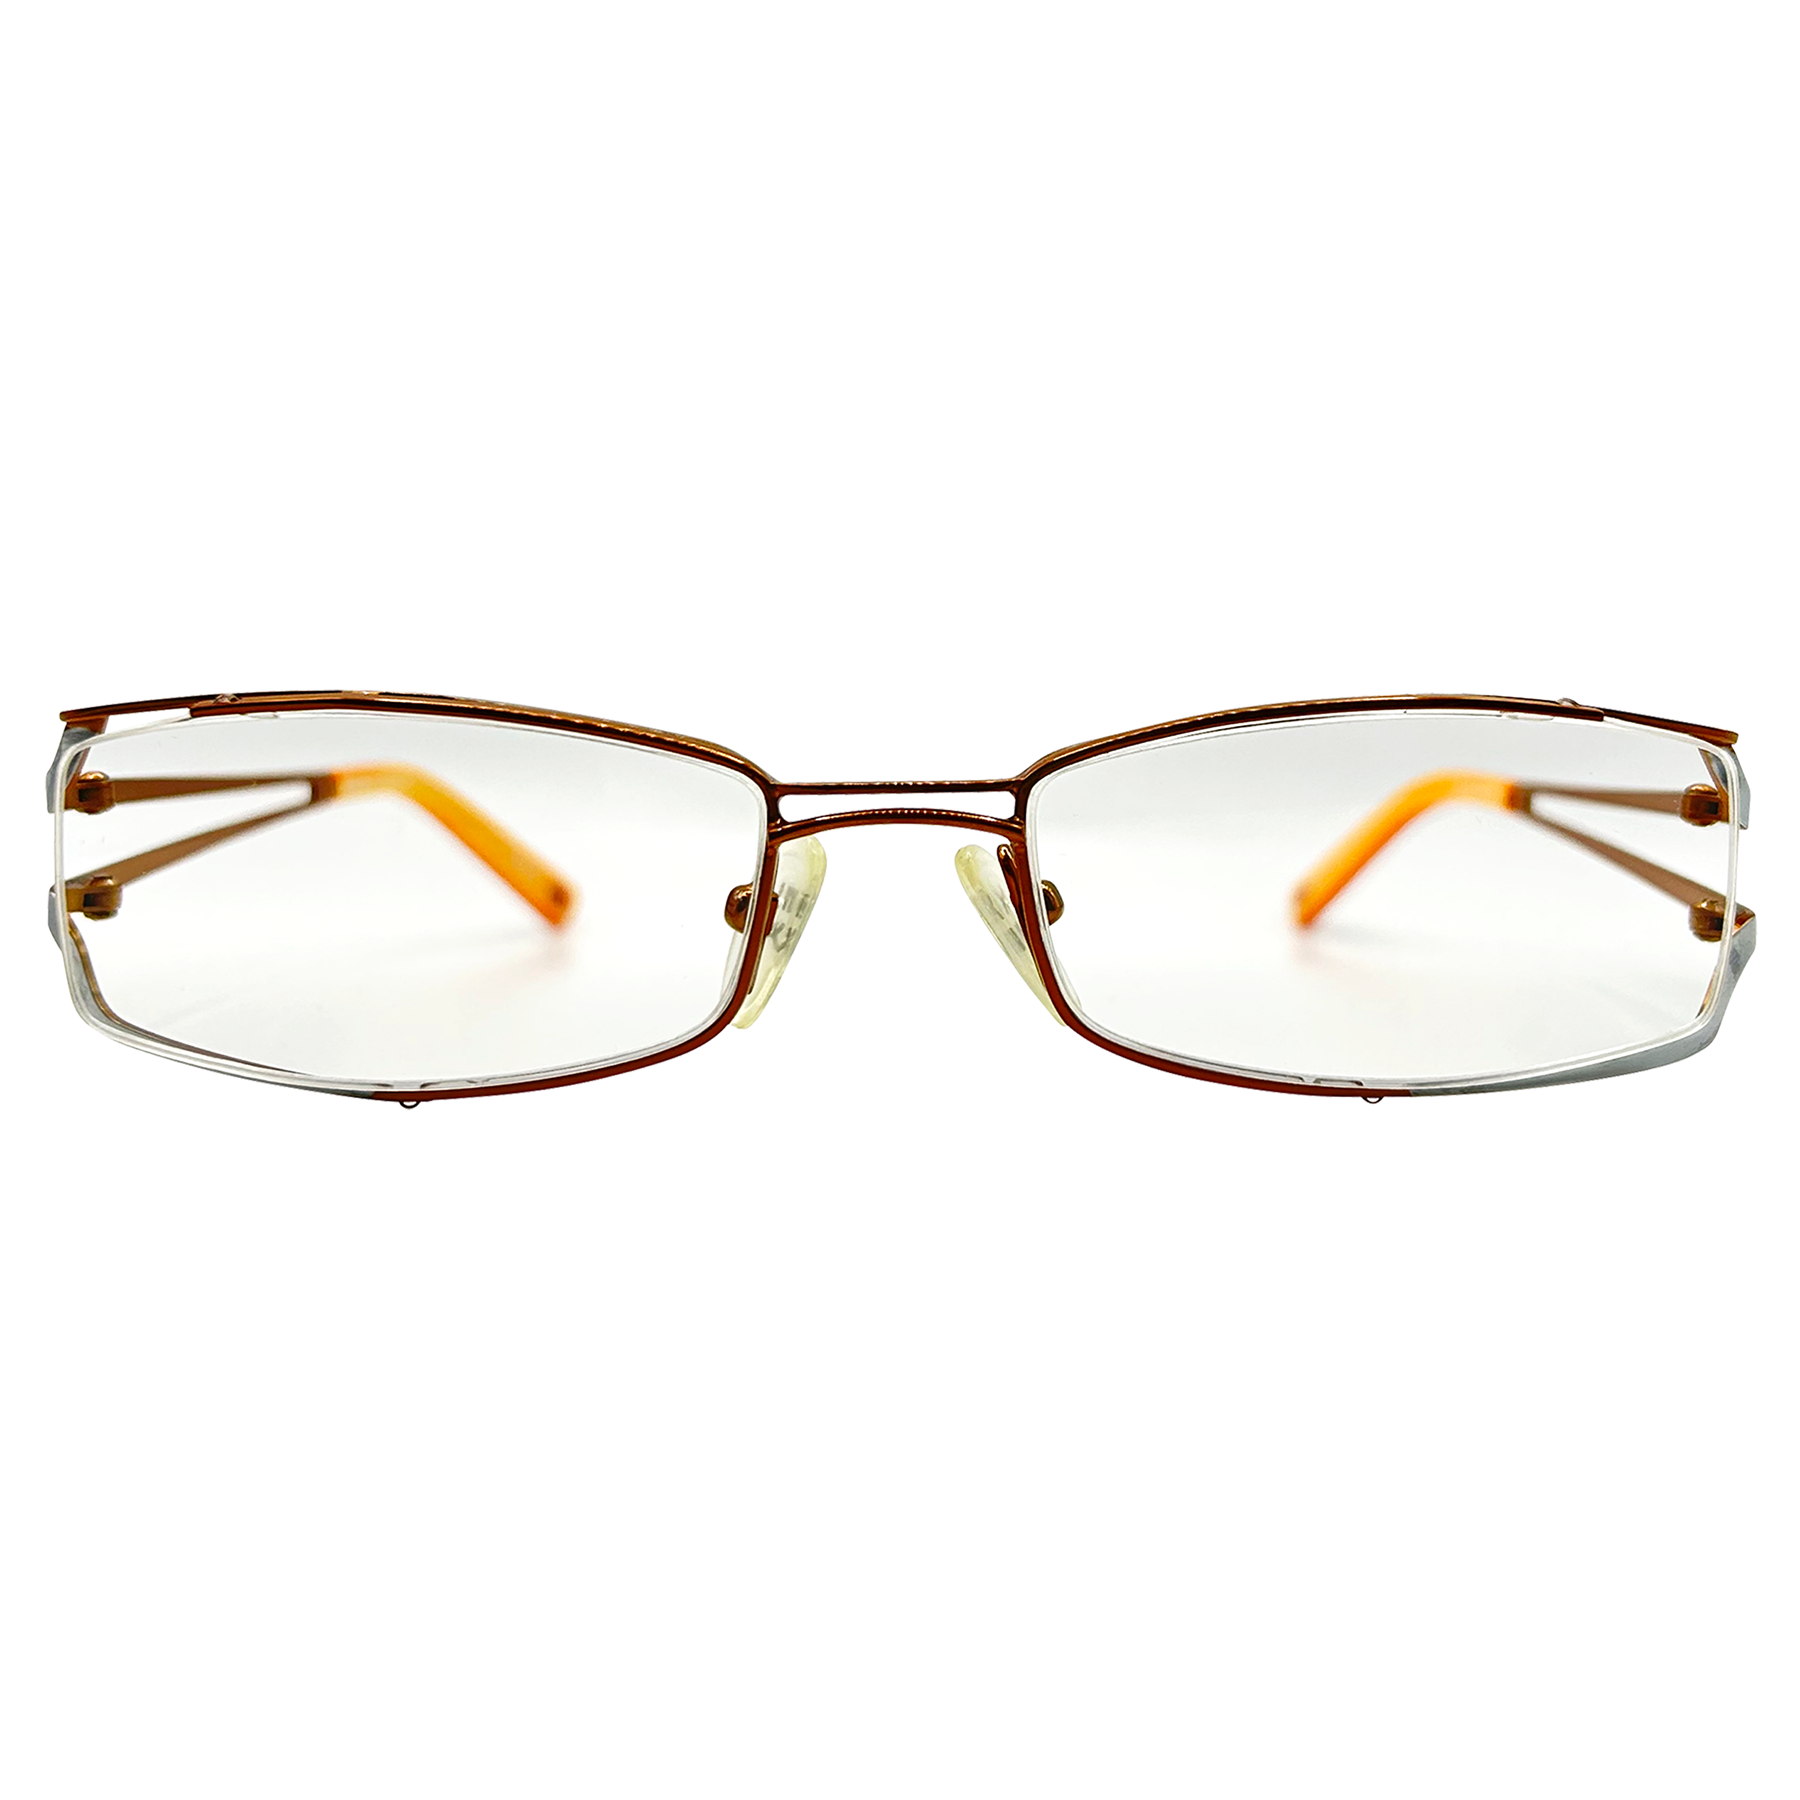 orange colored glasses with a metal frame and floating clear lens